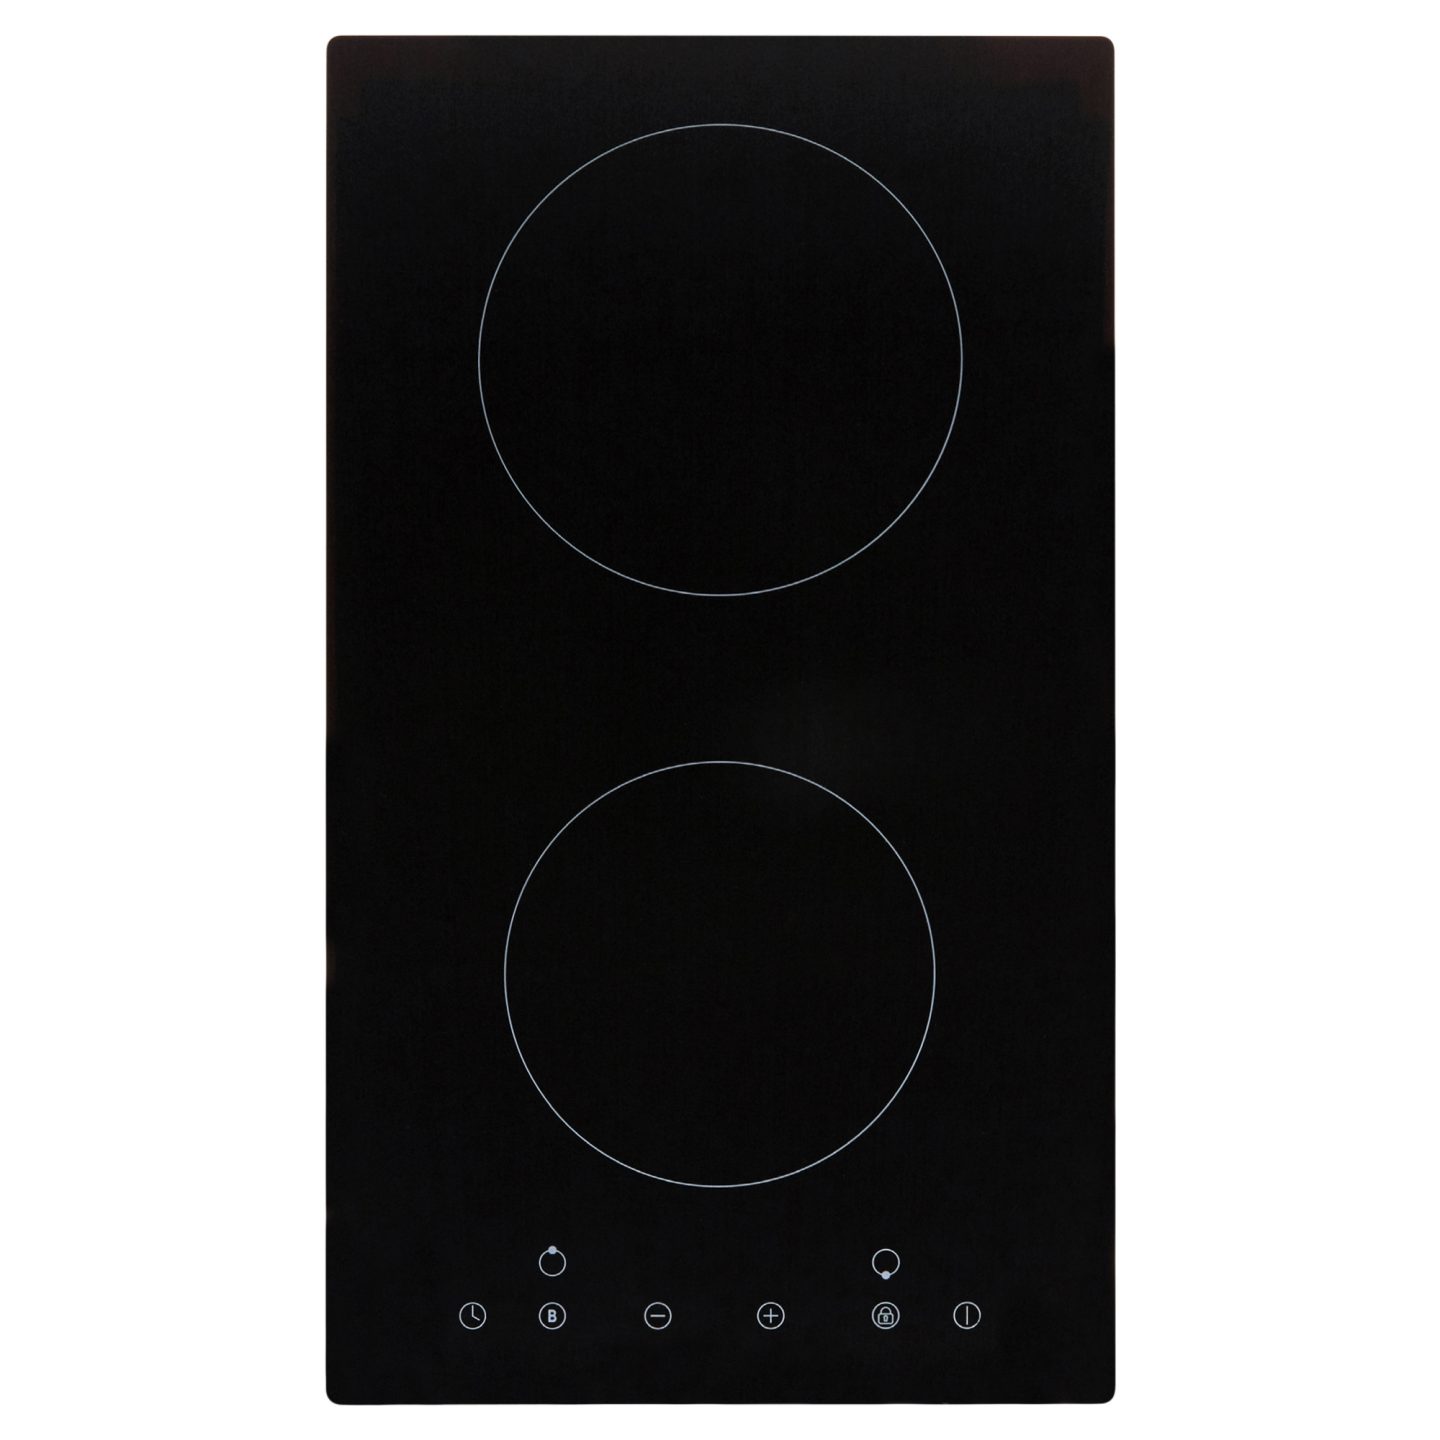 Cookology TCH601 60cm Ceramic Hob in Black Built-in worktop & Touch Controls 